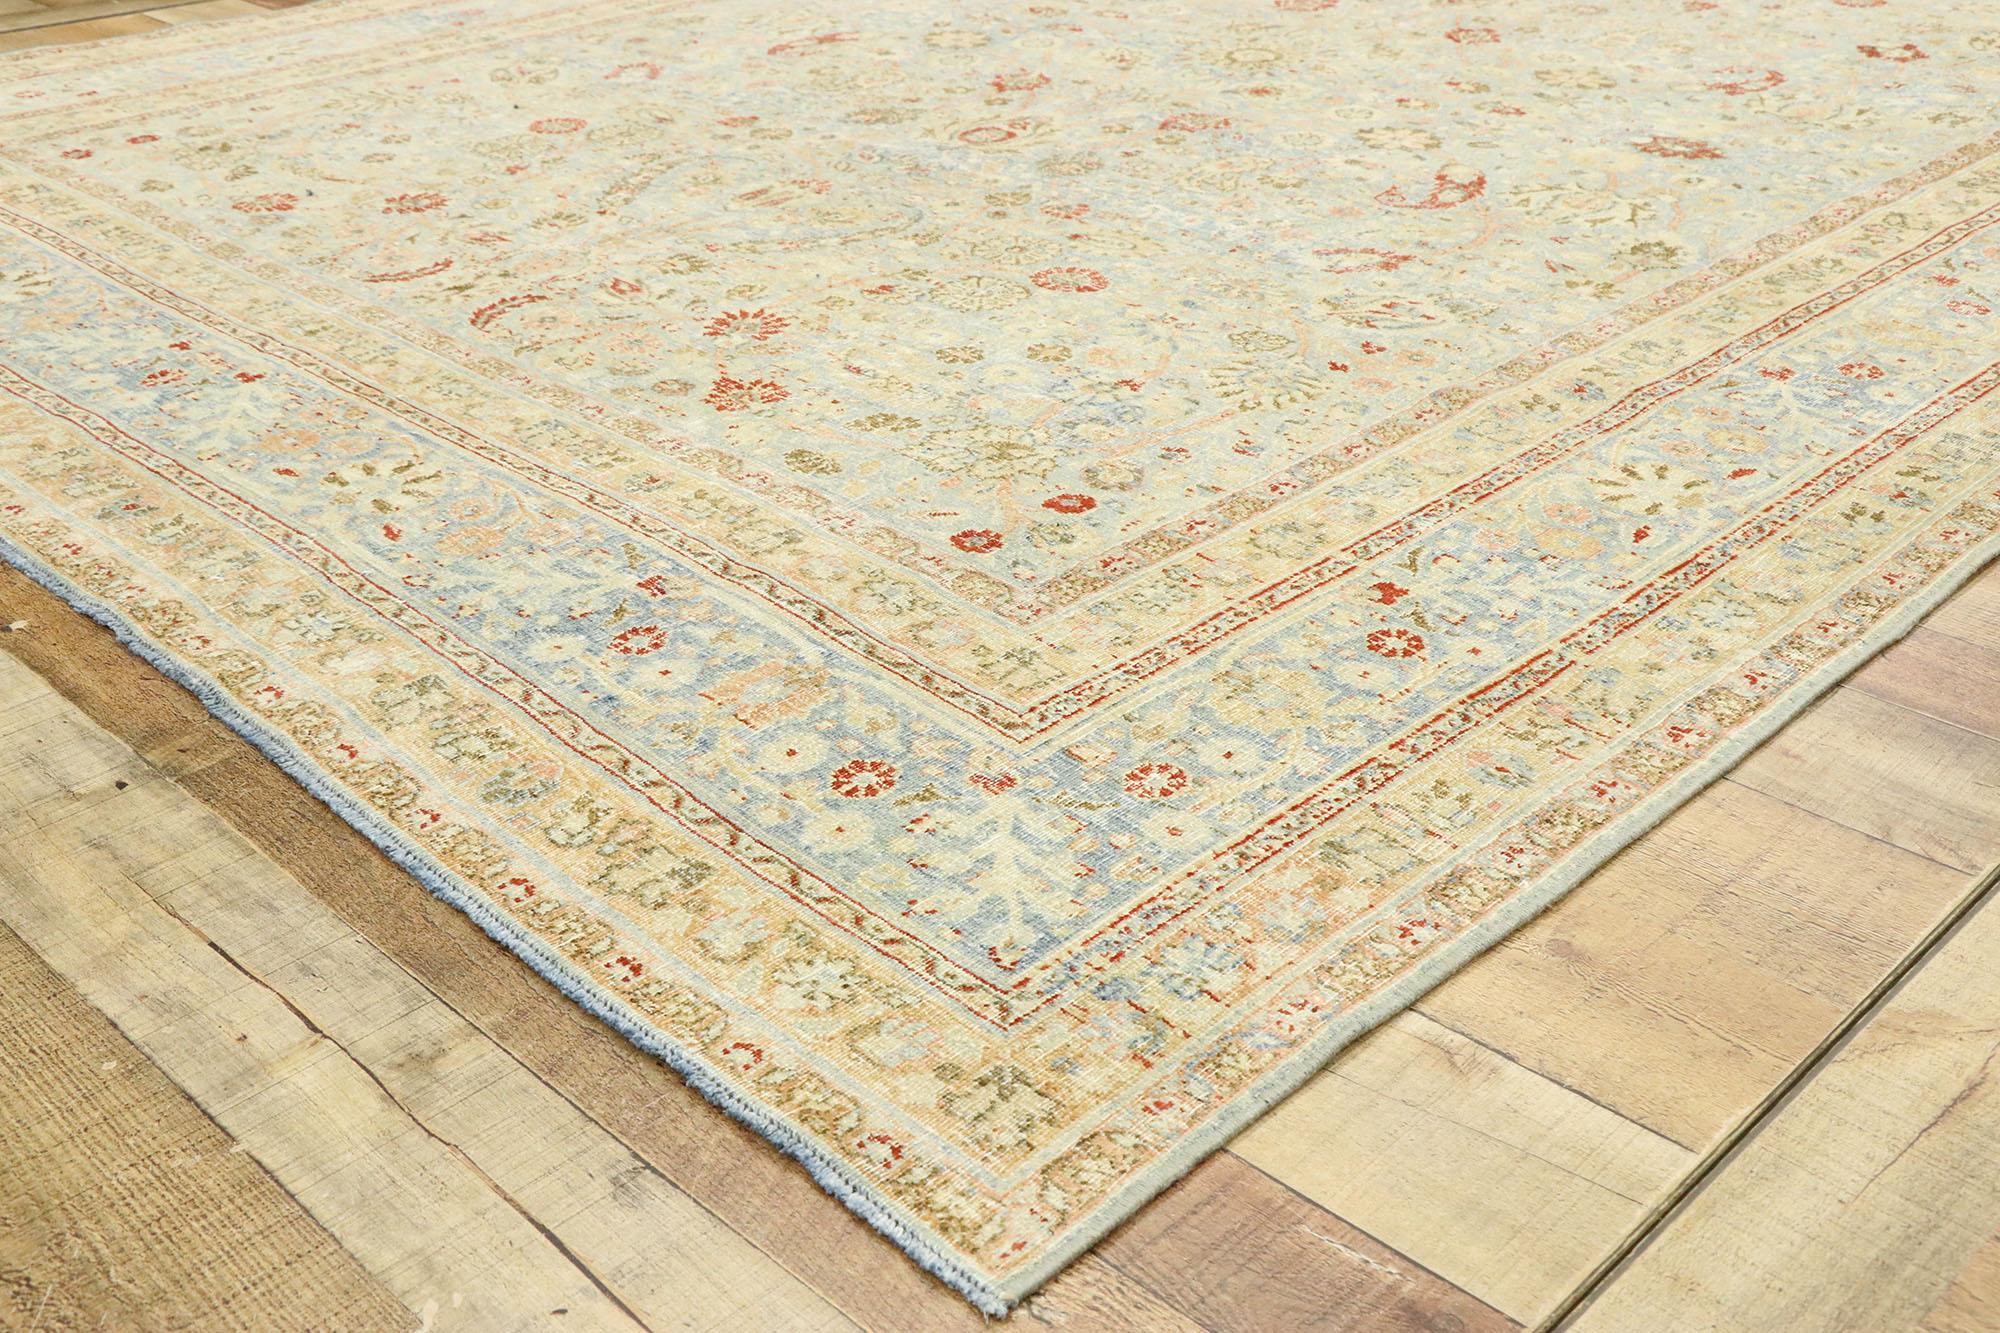 Wool Distressed Antique Persian Khorassan Rug with Rustic English Manor Style For Sale